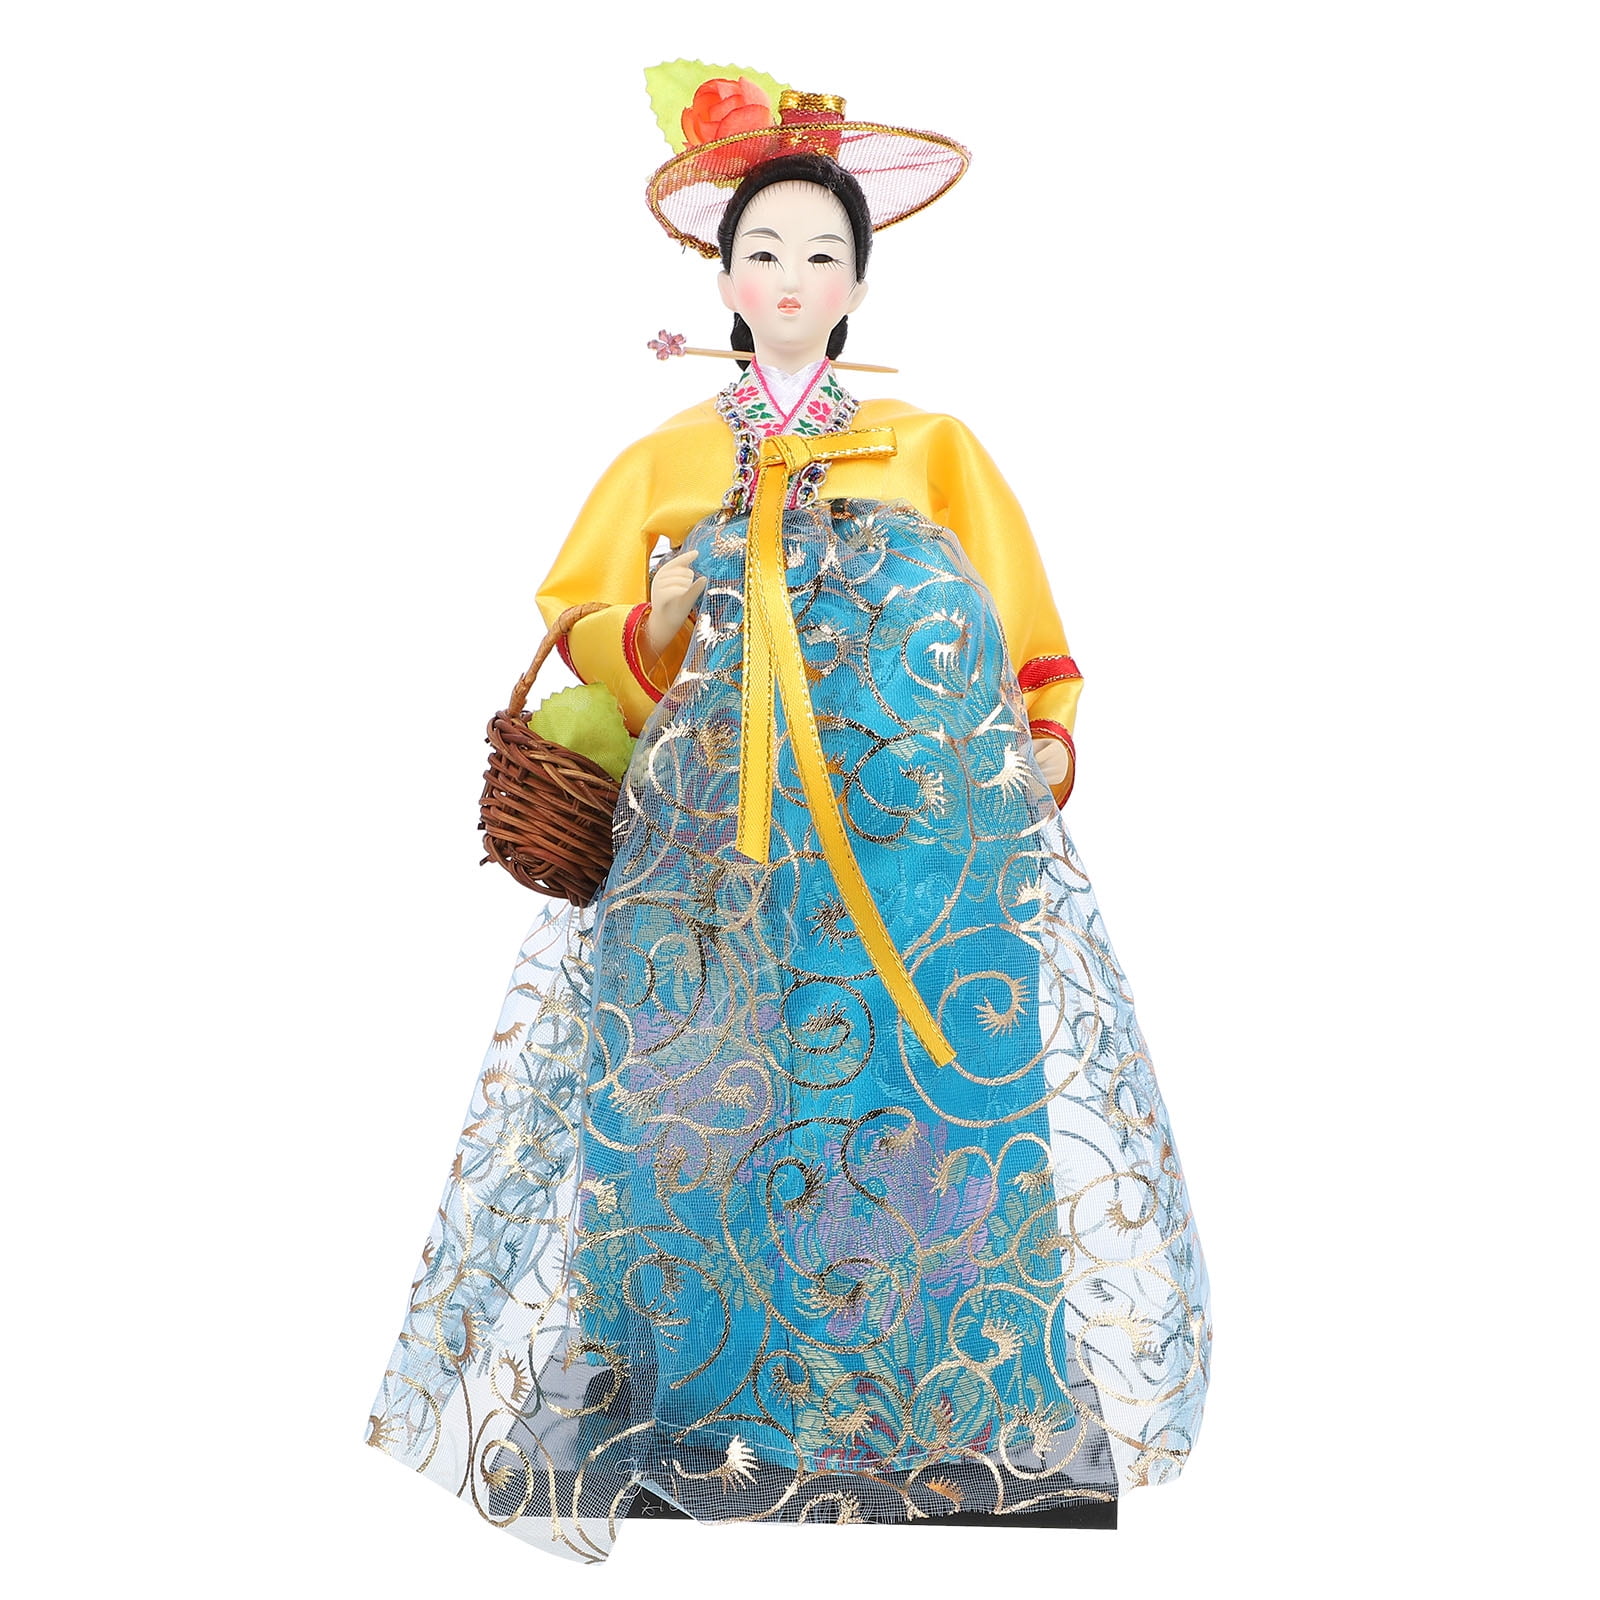  Toyvian Korean Dolls Figurines Korean Traditional Hanboks Dress  Doll Korean Doll Collectible Figurines Korea Female Statue Gift for Office  Bar Home Party Table Decoration 12inch Kimono Doll Figure : Home 